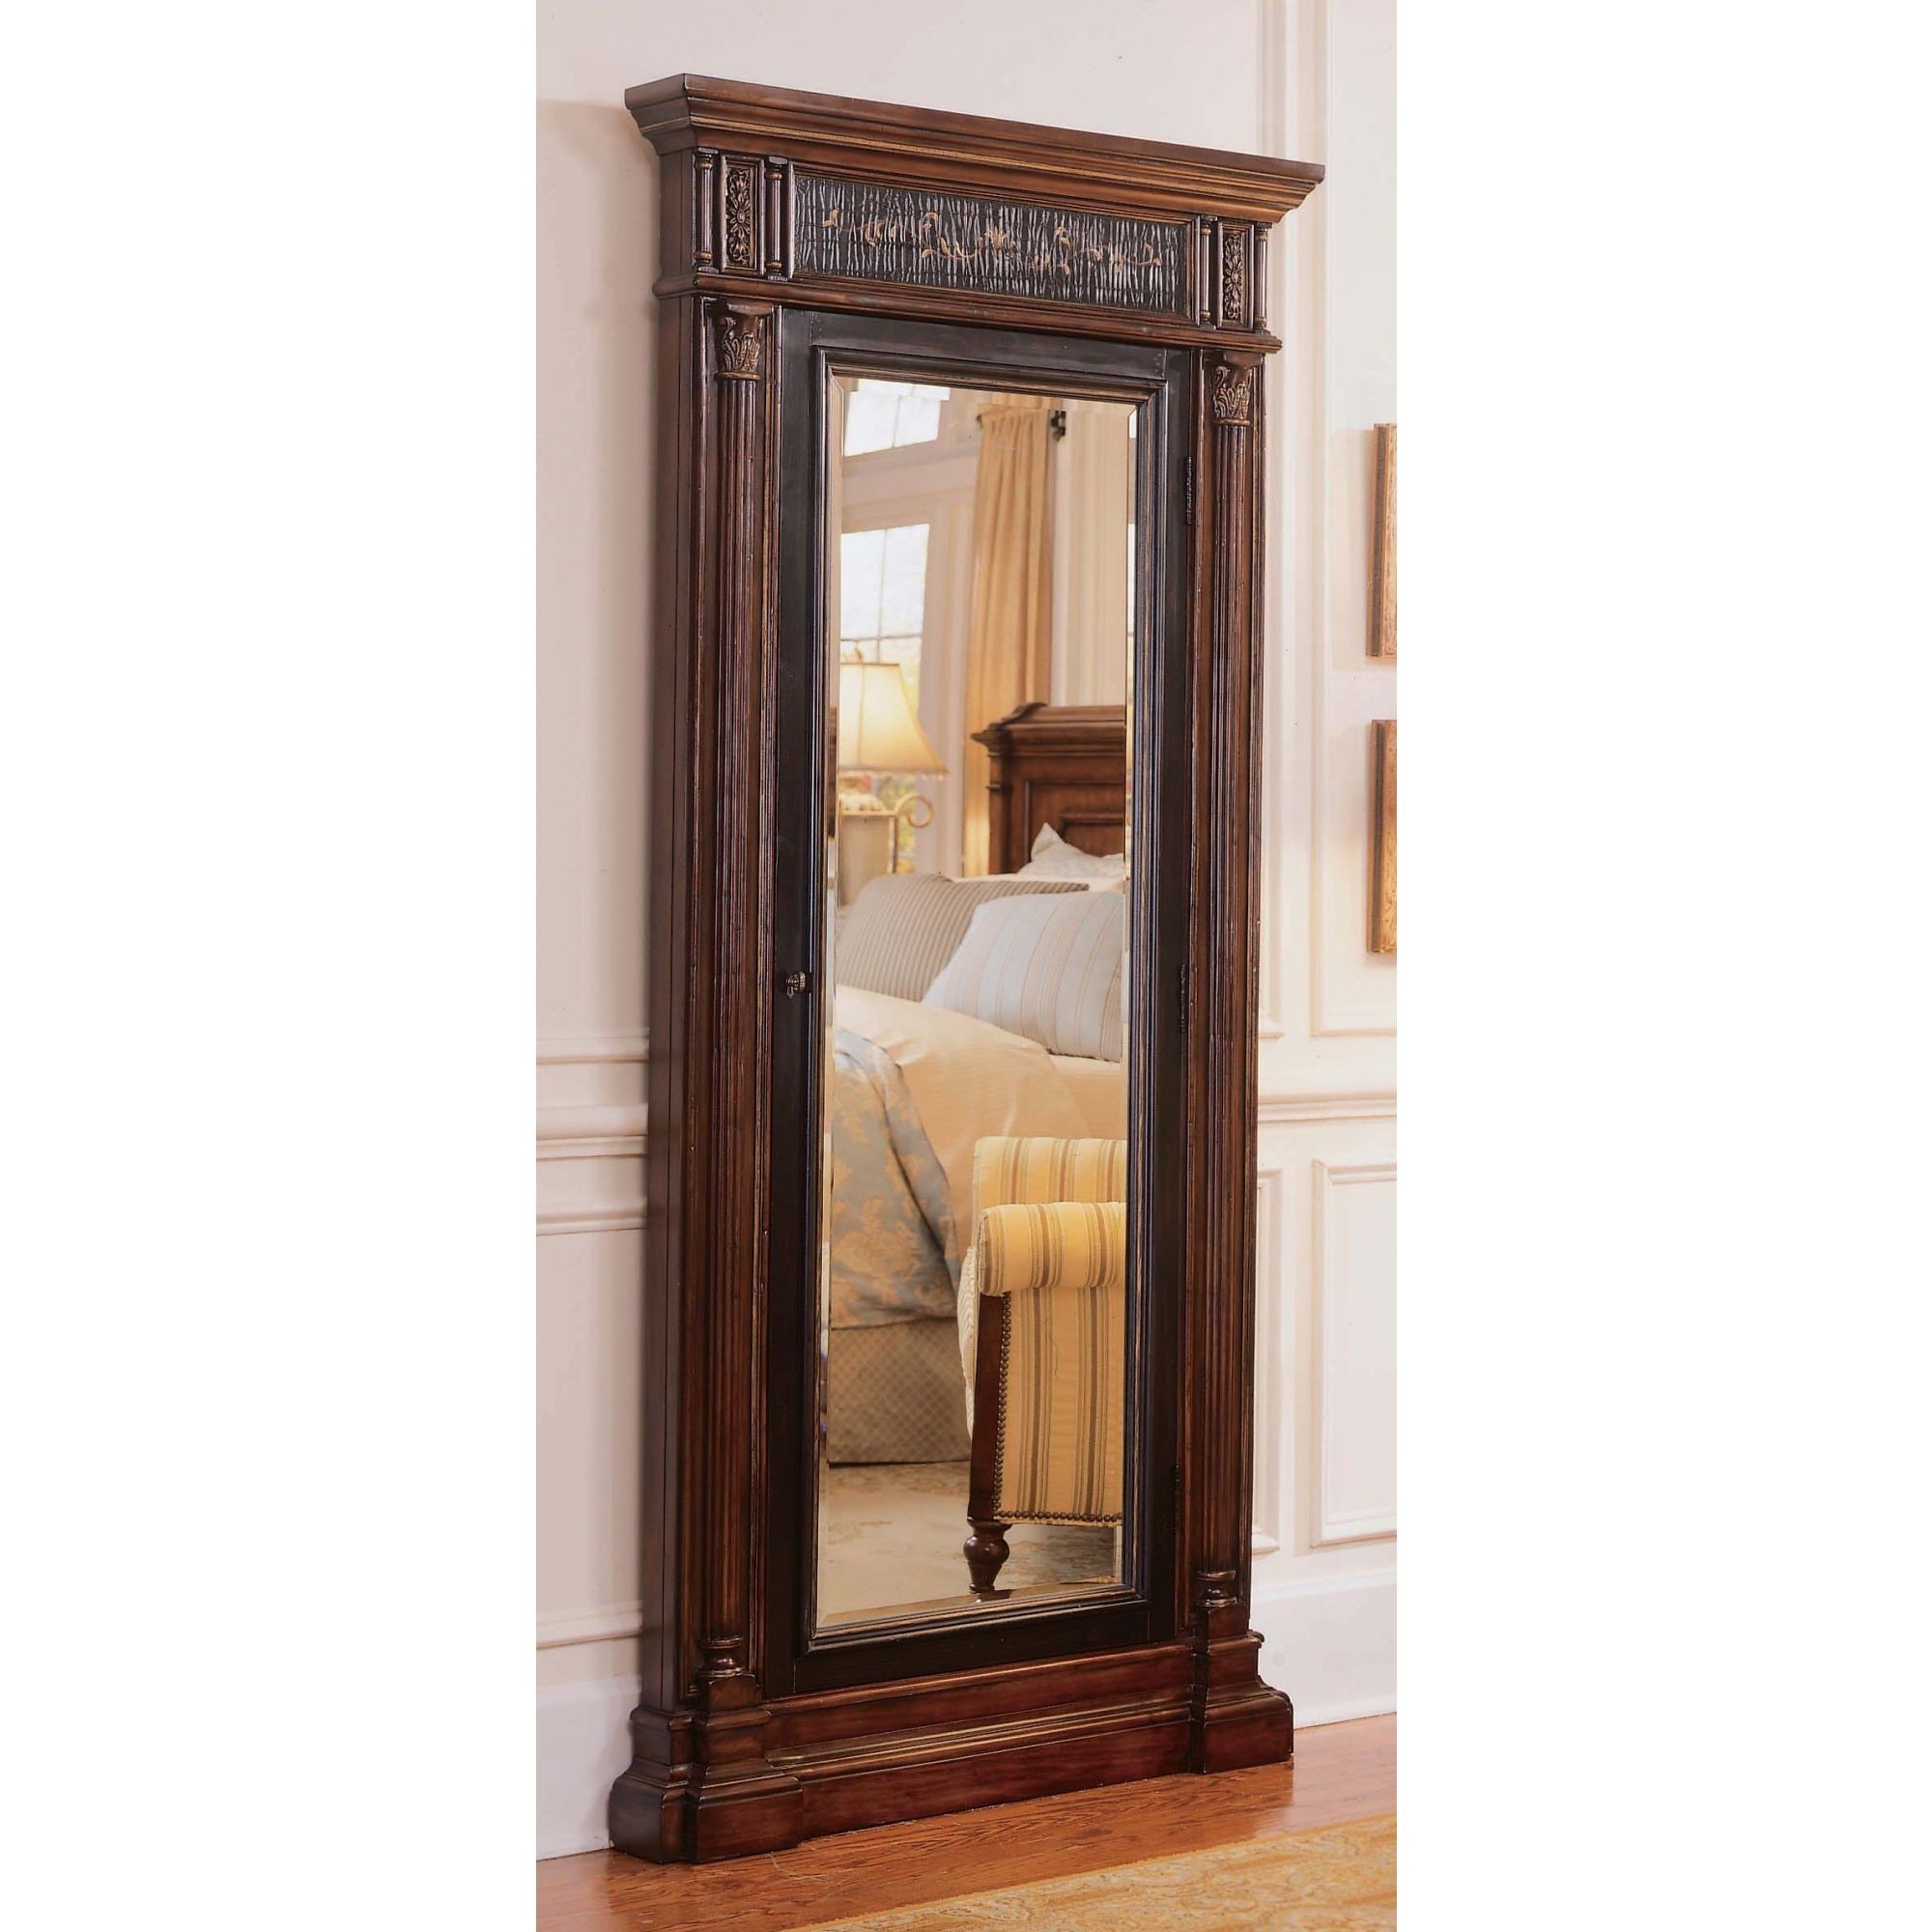 Large jewelry armoire